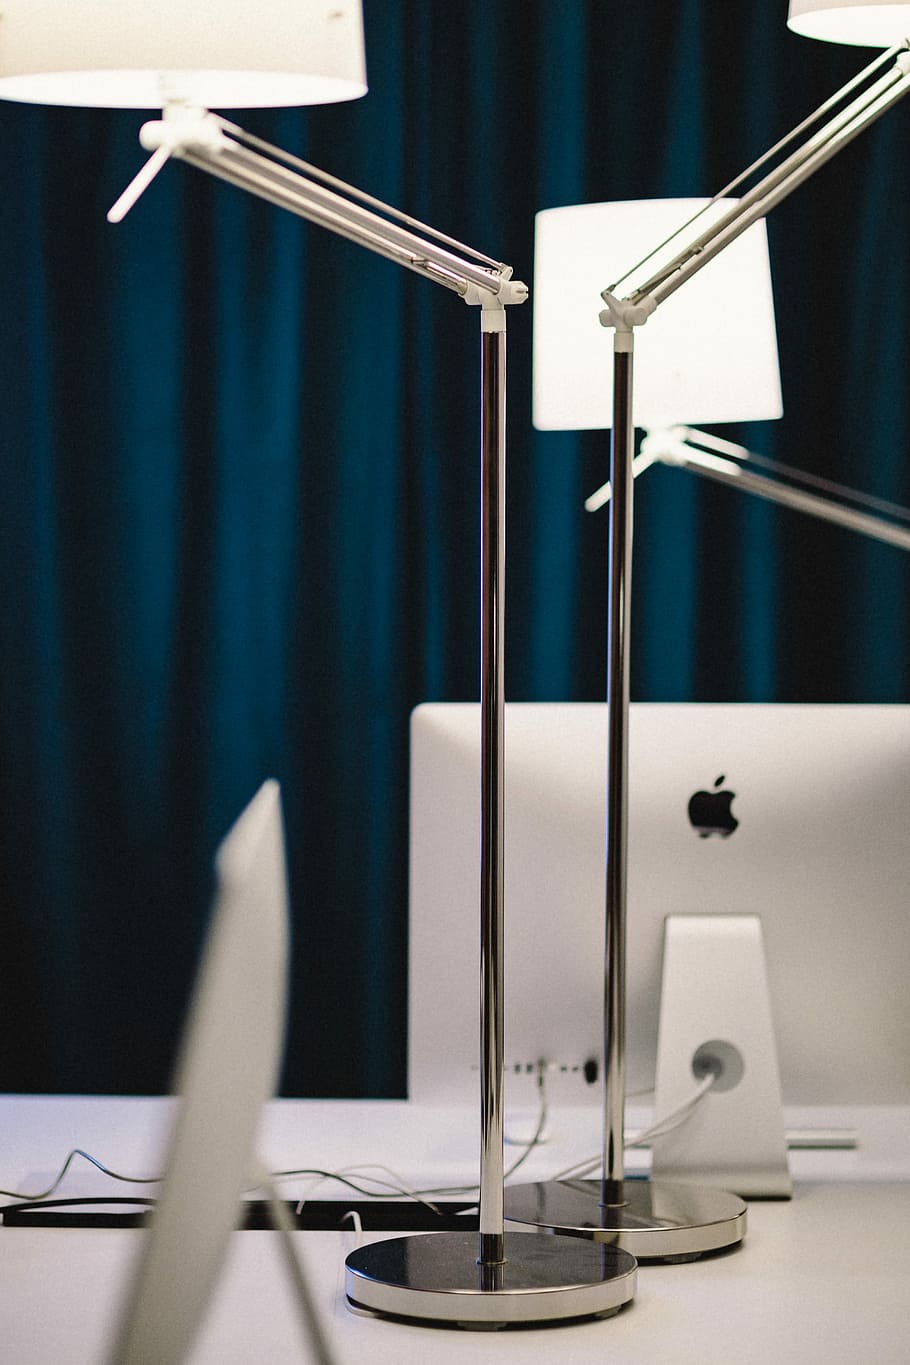 view, white, lamps, office, Closeup, the office, Apple iMac, workspace, workplace, iMac